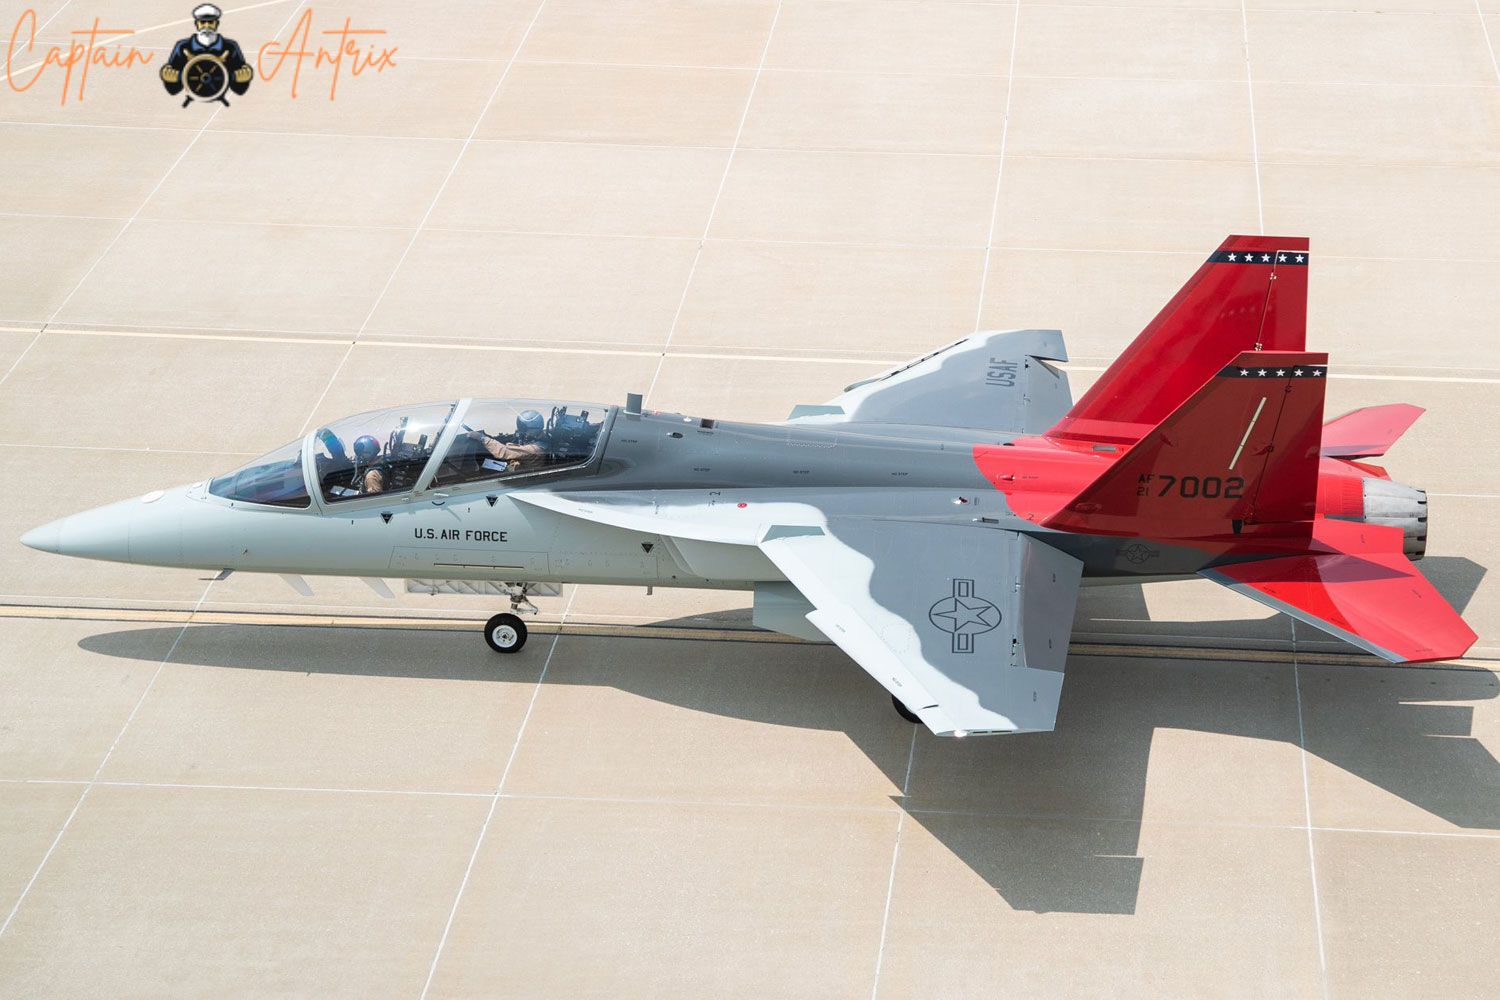 Achieving Milestones: The Boeing T-7A Red Hawk in U.S. Air Force's Advanced Training Program